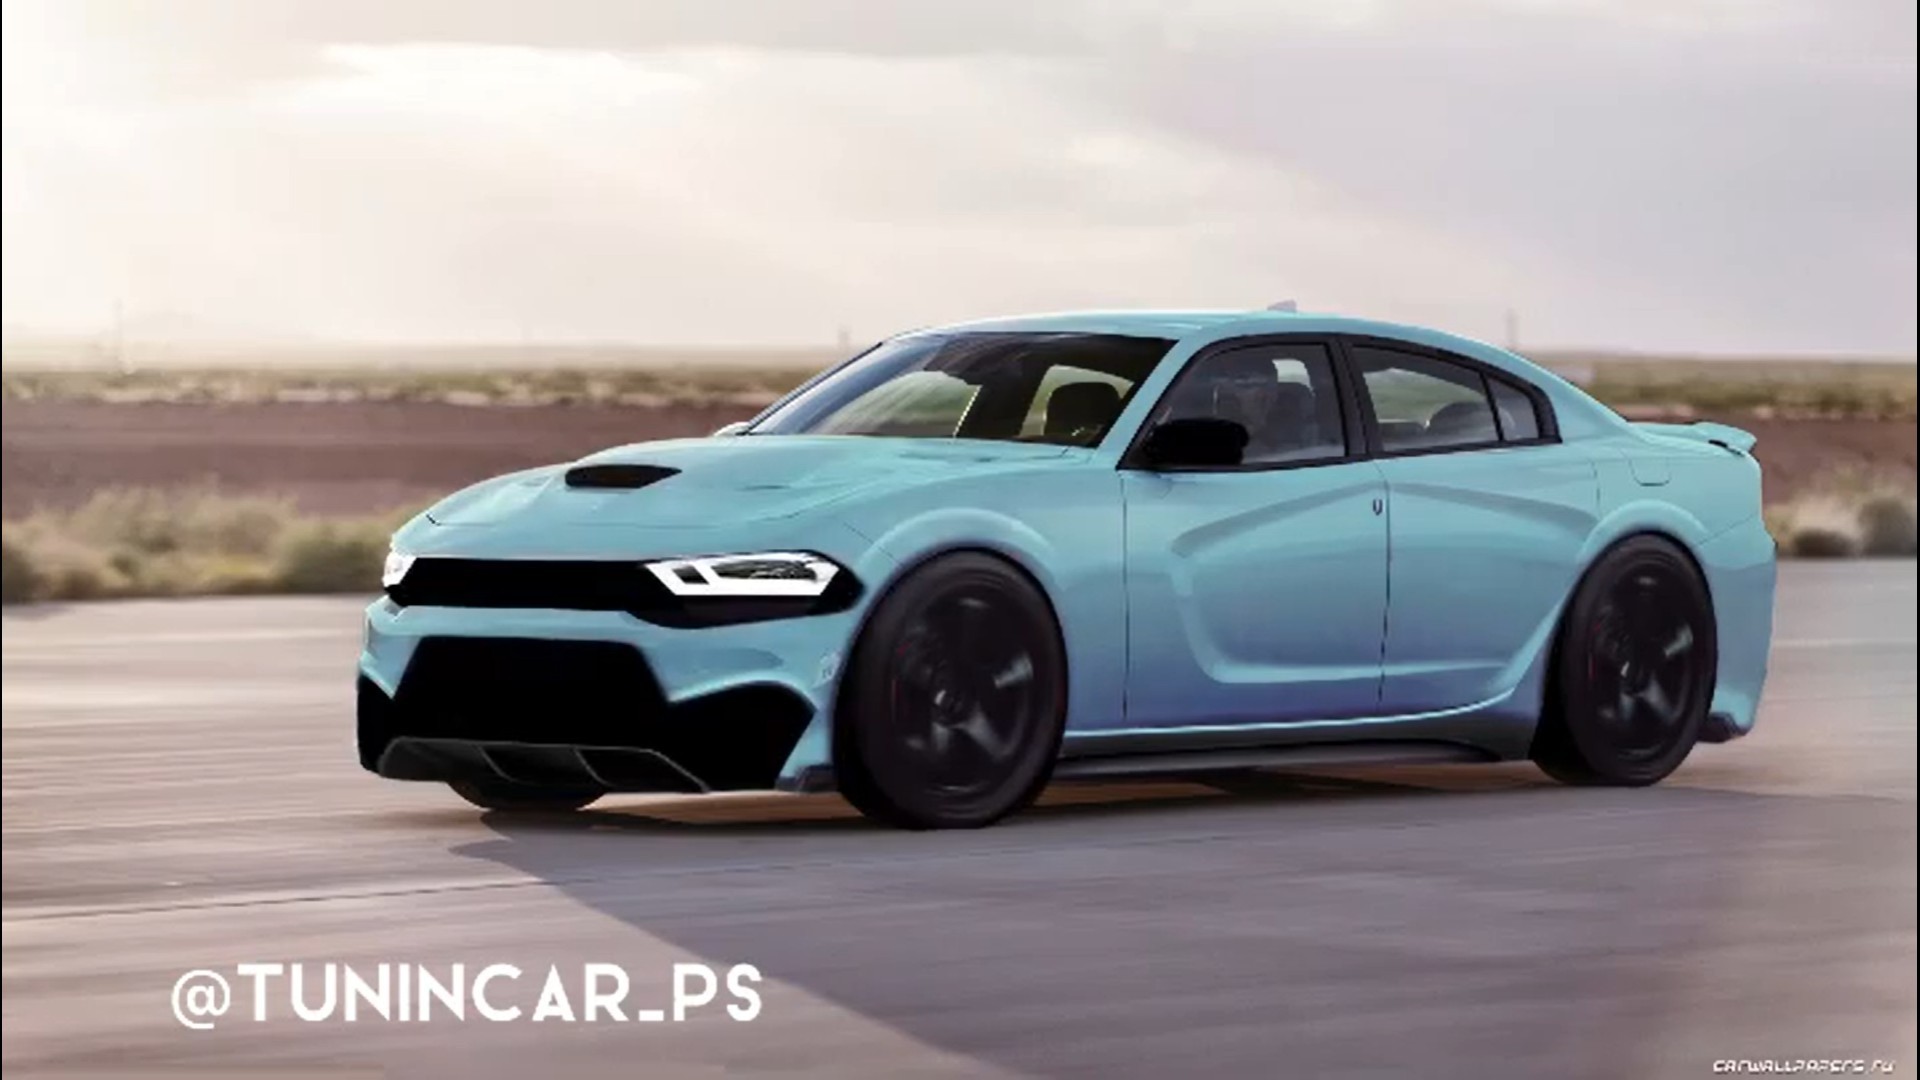 2023 Dodge Charger Arrives Digitally Curvy and Sporting “V12